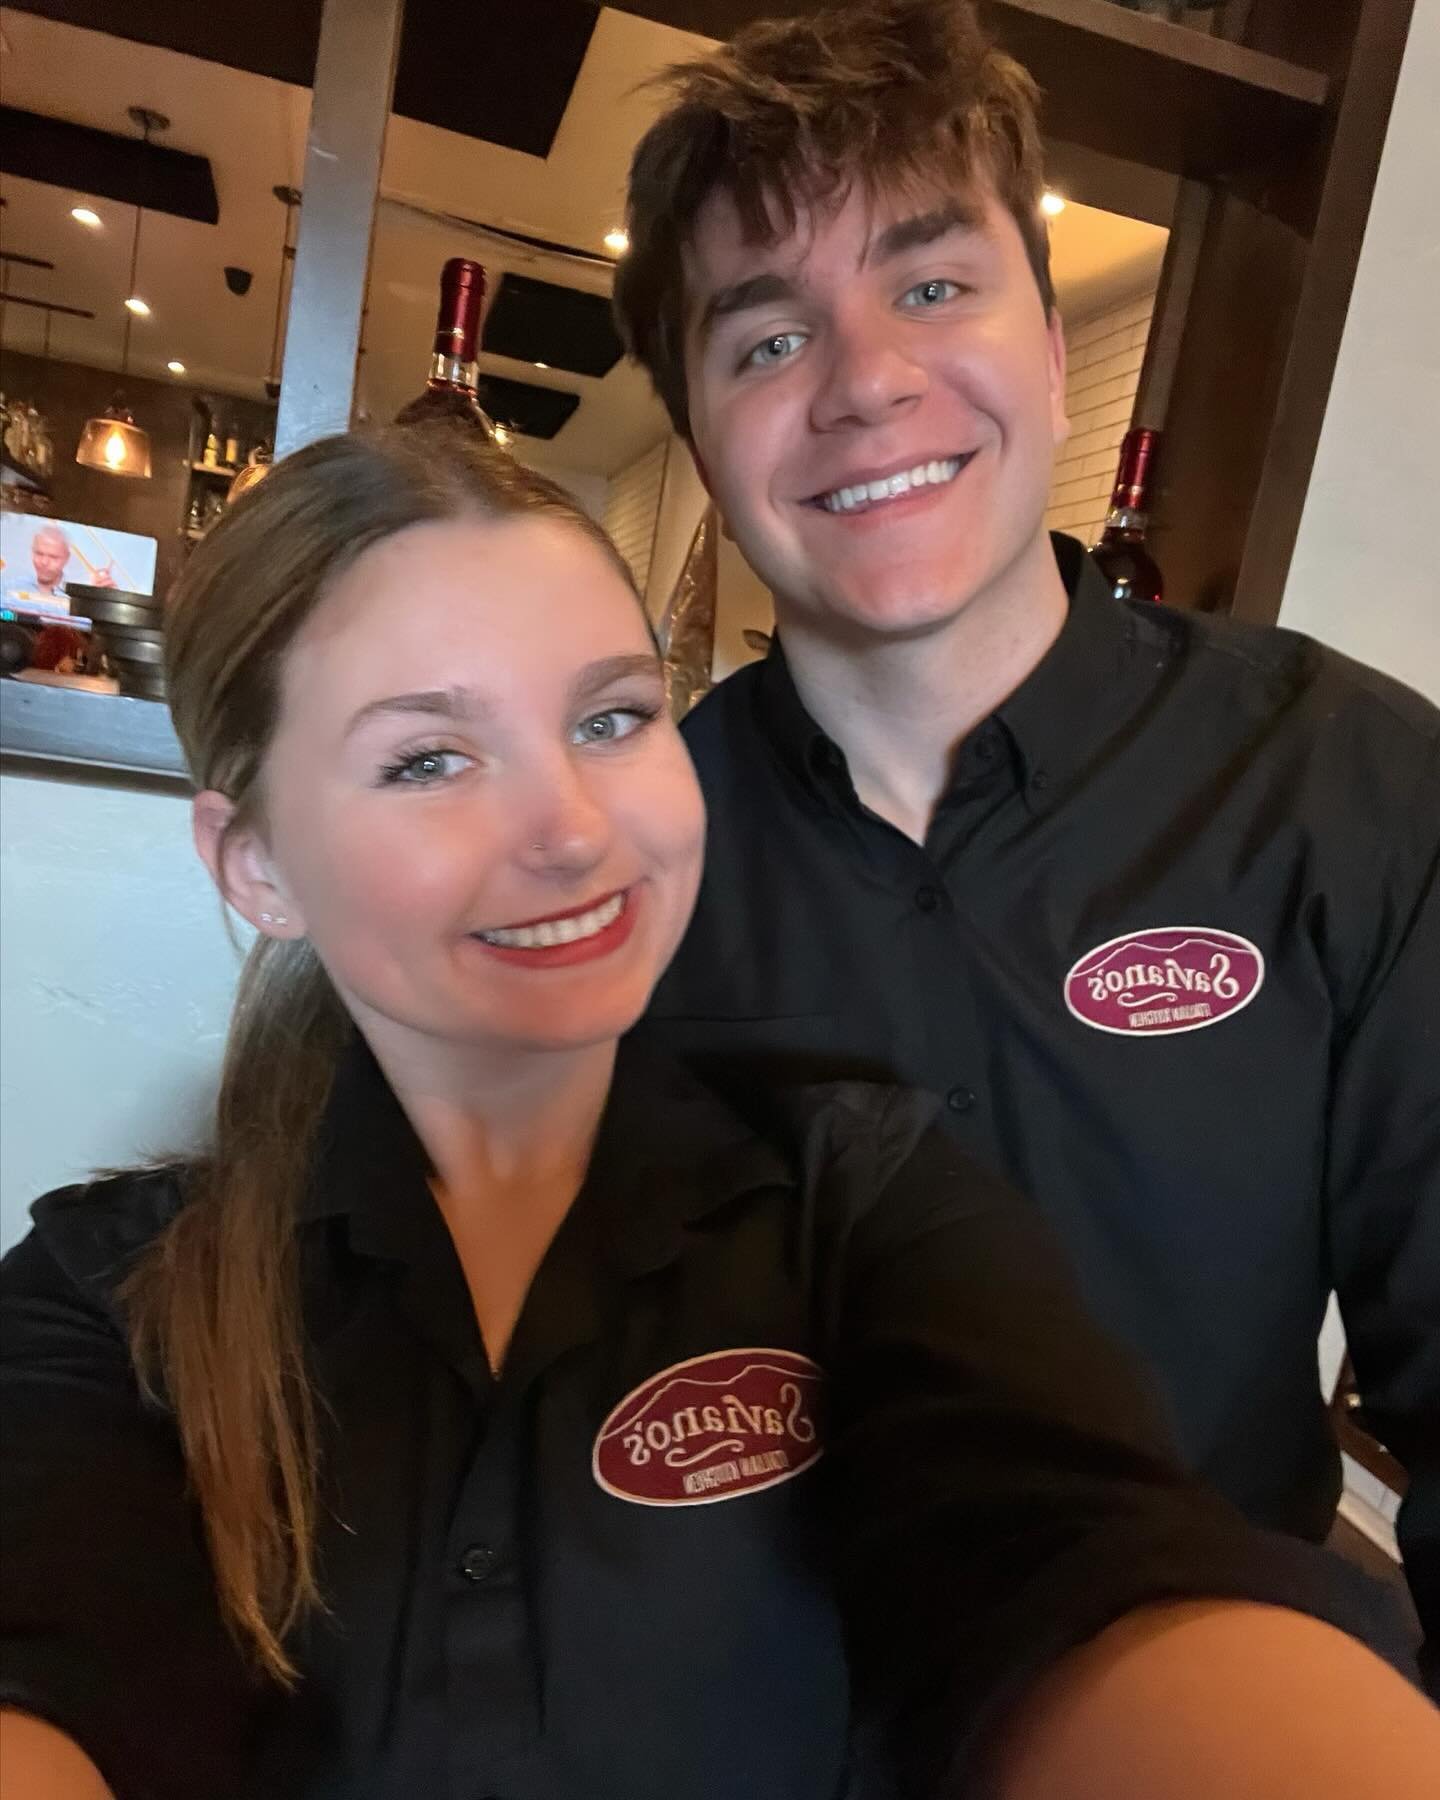 ☀️ Come up and visit us on this sunny Tuesday! See the smiling faces at Savianos Italian Kitchen and enjoy your favorite Italian dishes, along with the best pizza in DFW. We can&rsquo;t wait to welcome you! 🍝🍕 #SavianosItalianKitchen #SunnyTuesday 